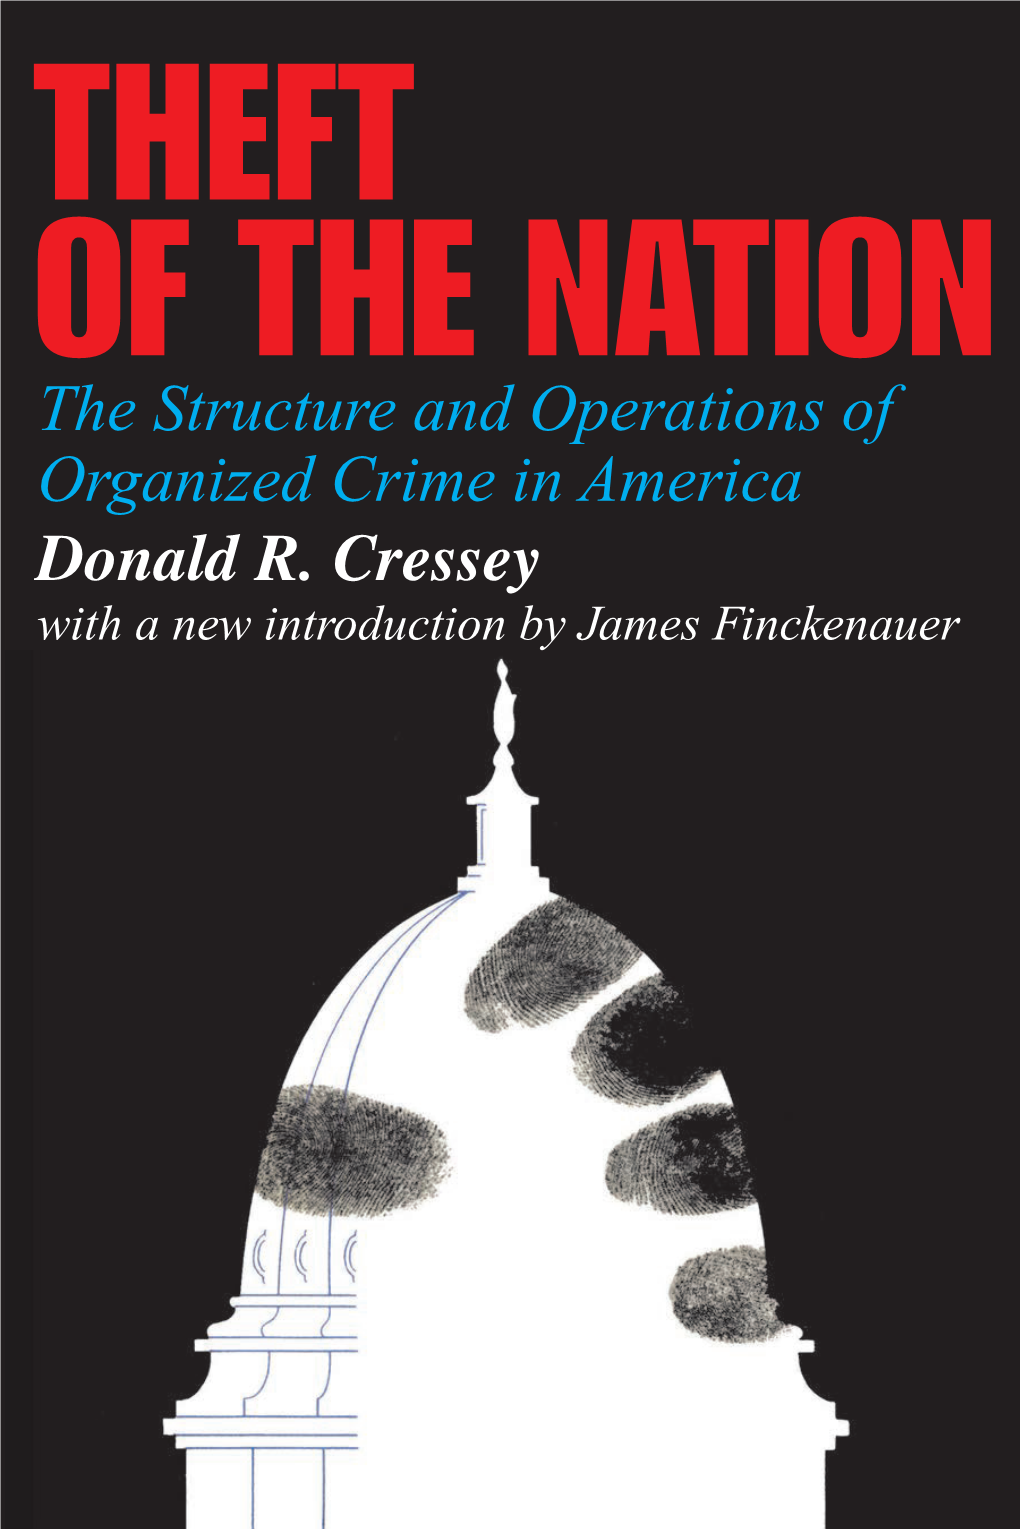 THEFT of the NATION the Structure and Operations of Organized